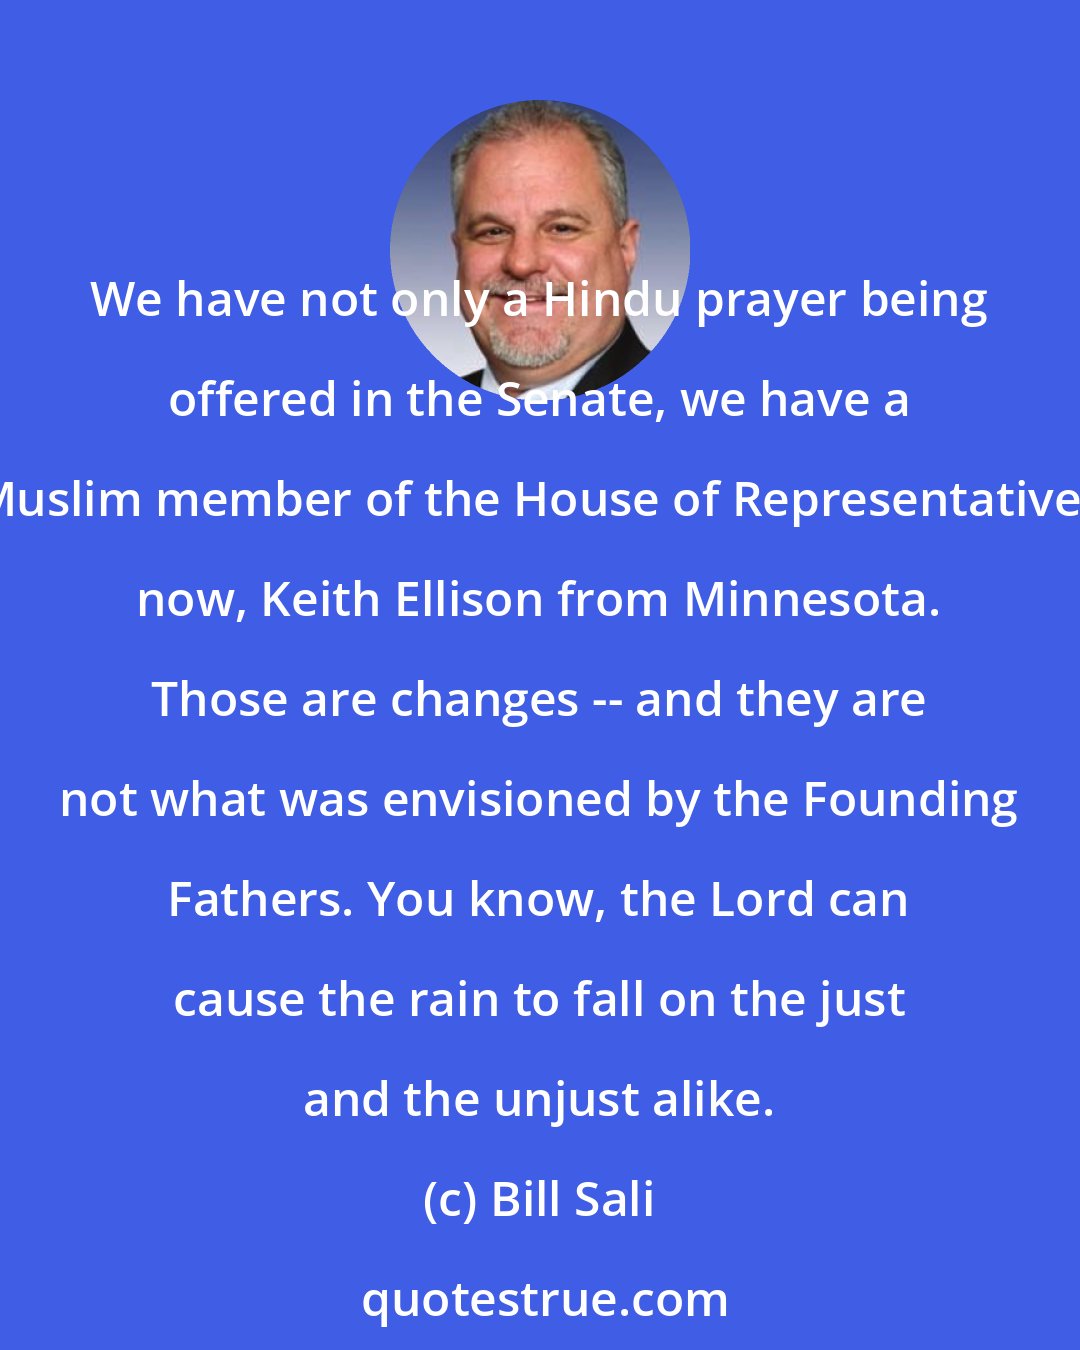 Bill Sali: We have not only a Hindu prayer being offered in the Senate, we have a Muslim member of the House of Representatives now, Keith Ellison from Minnesota. Those are changes -- and they are not what was envisioned by the Founding Fathers. You know, the Lord can cause the rain to fall on the just and the unjust alike.